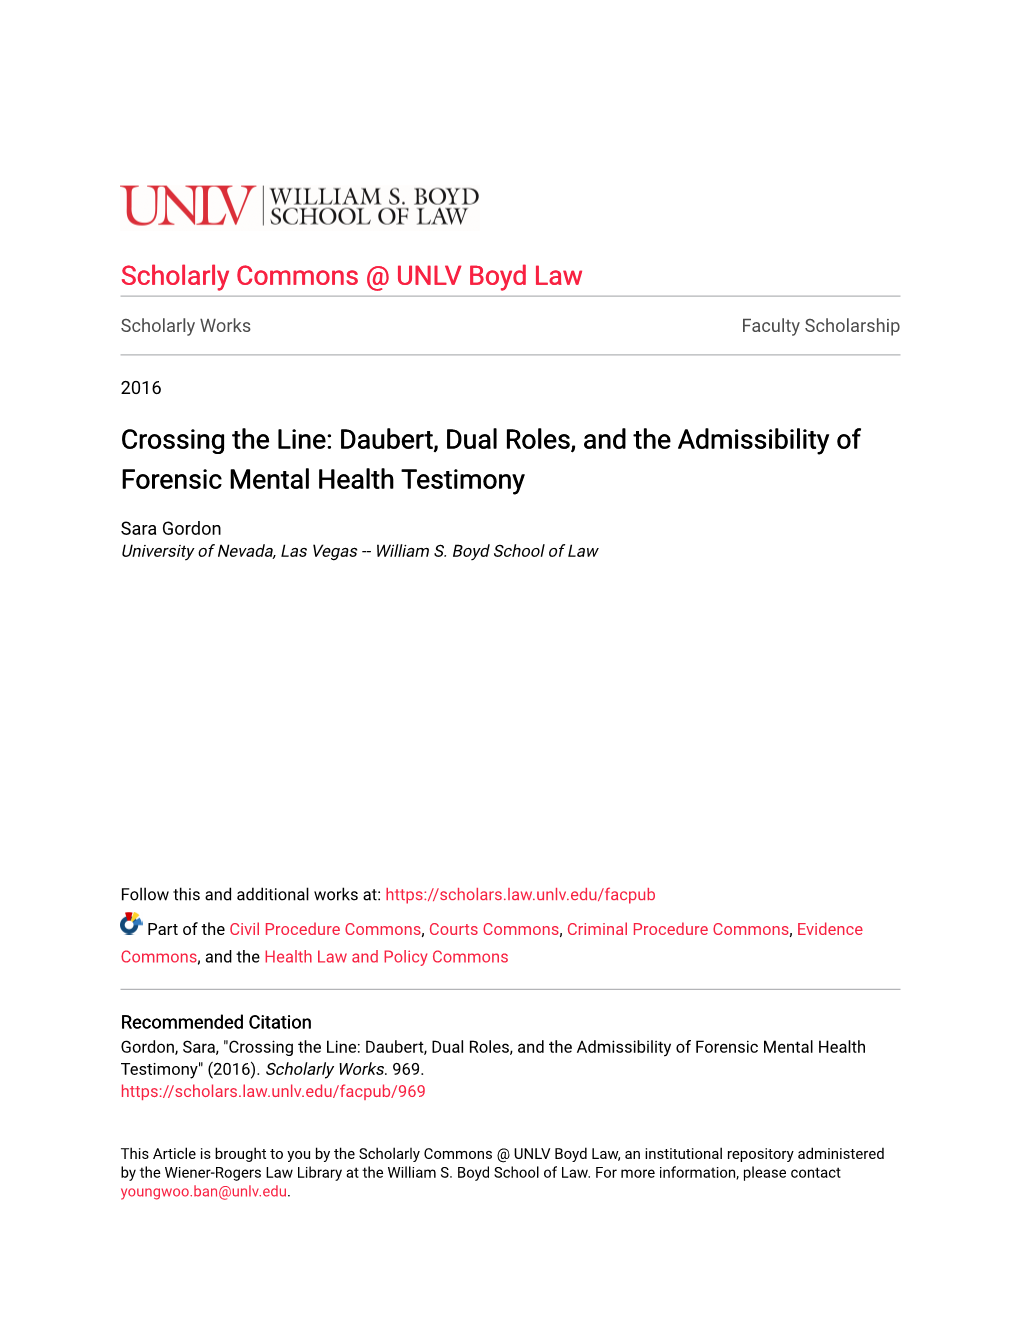 Daubert, Dual Roles, and the Admissibility of Forensic Mental Health Testimony